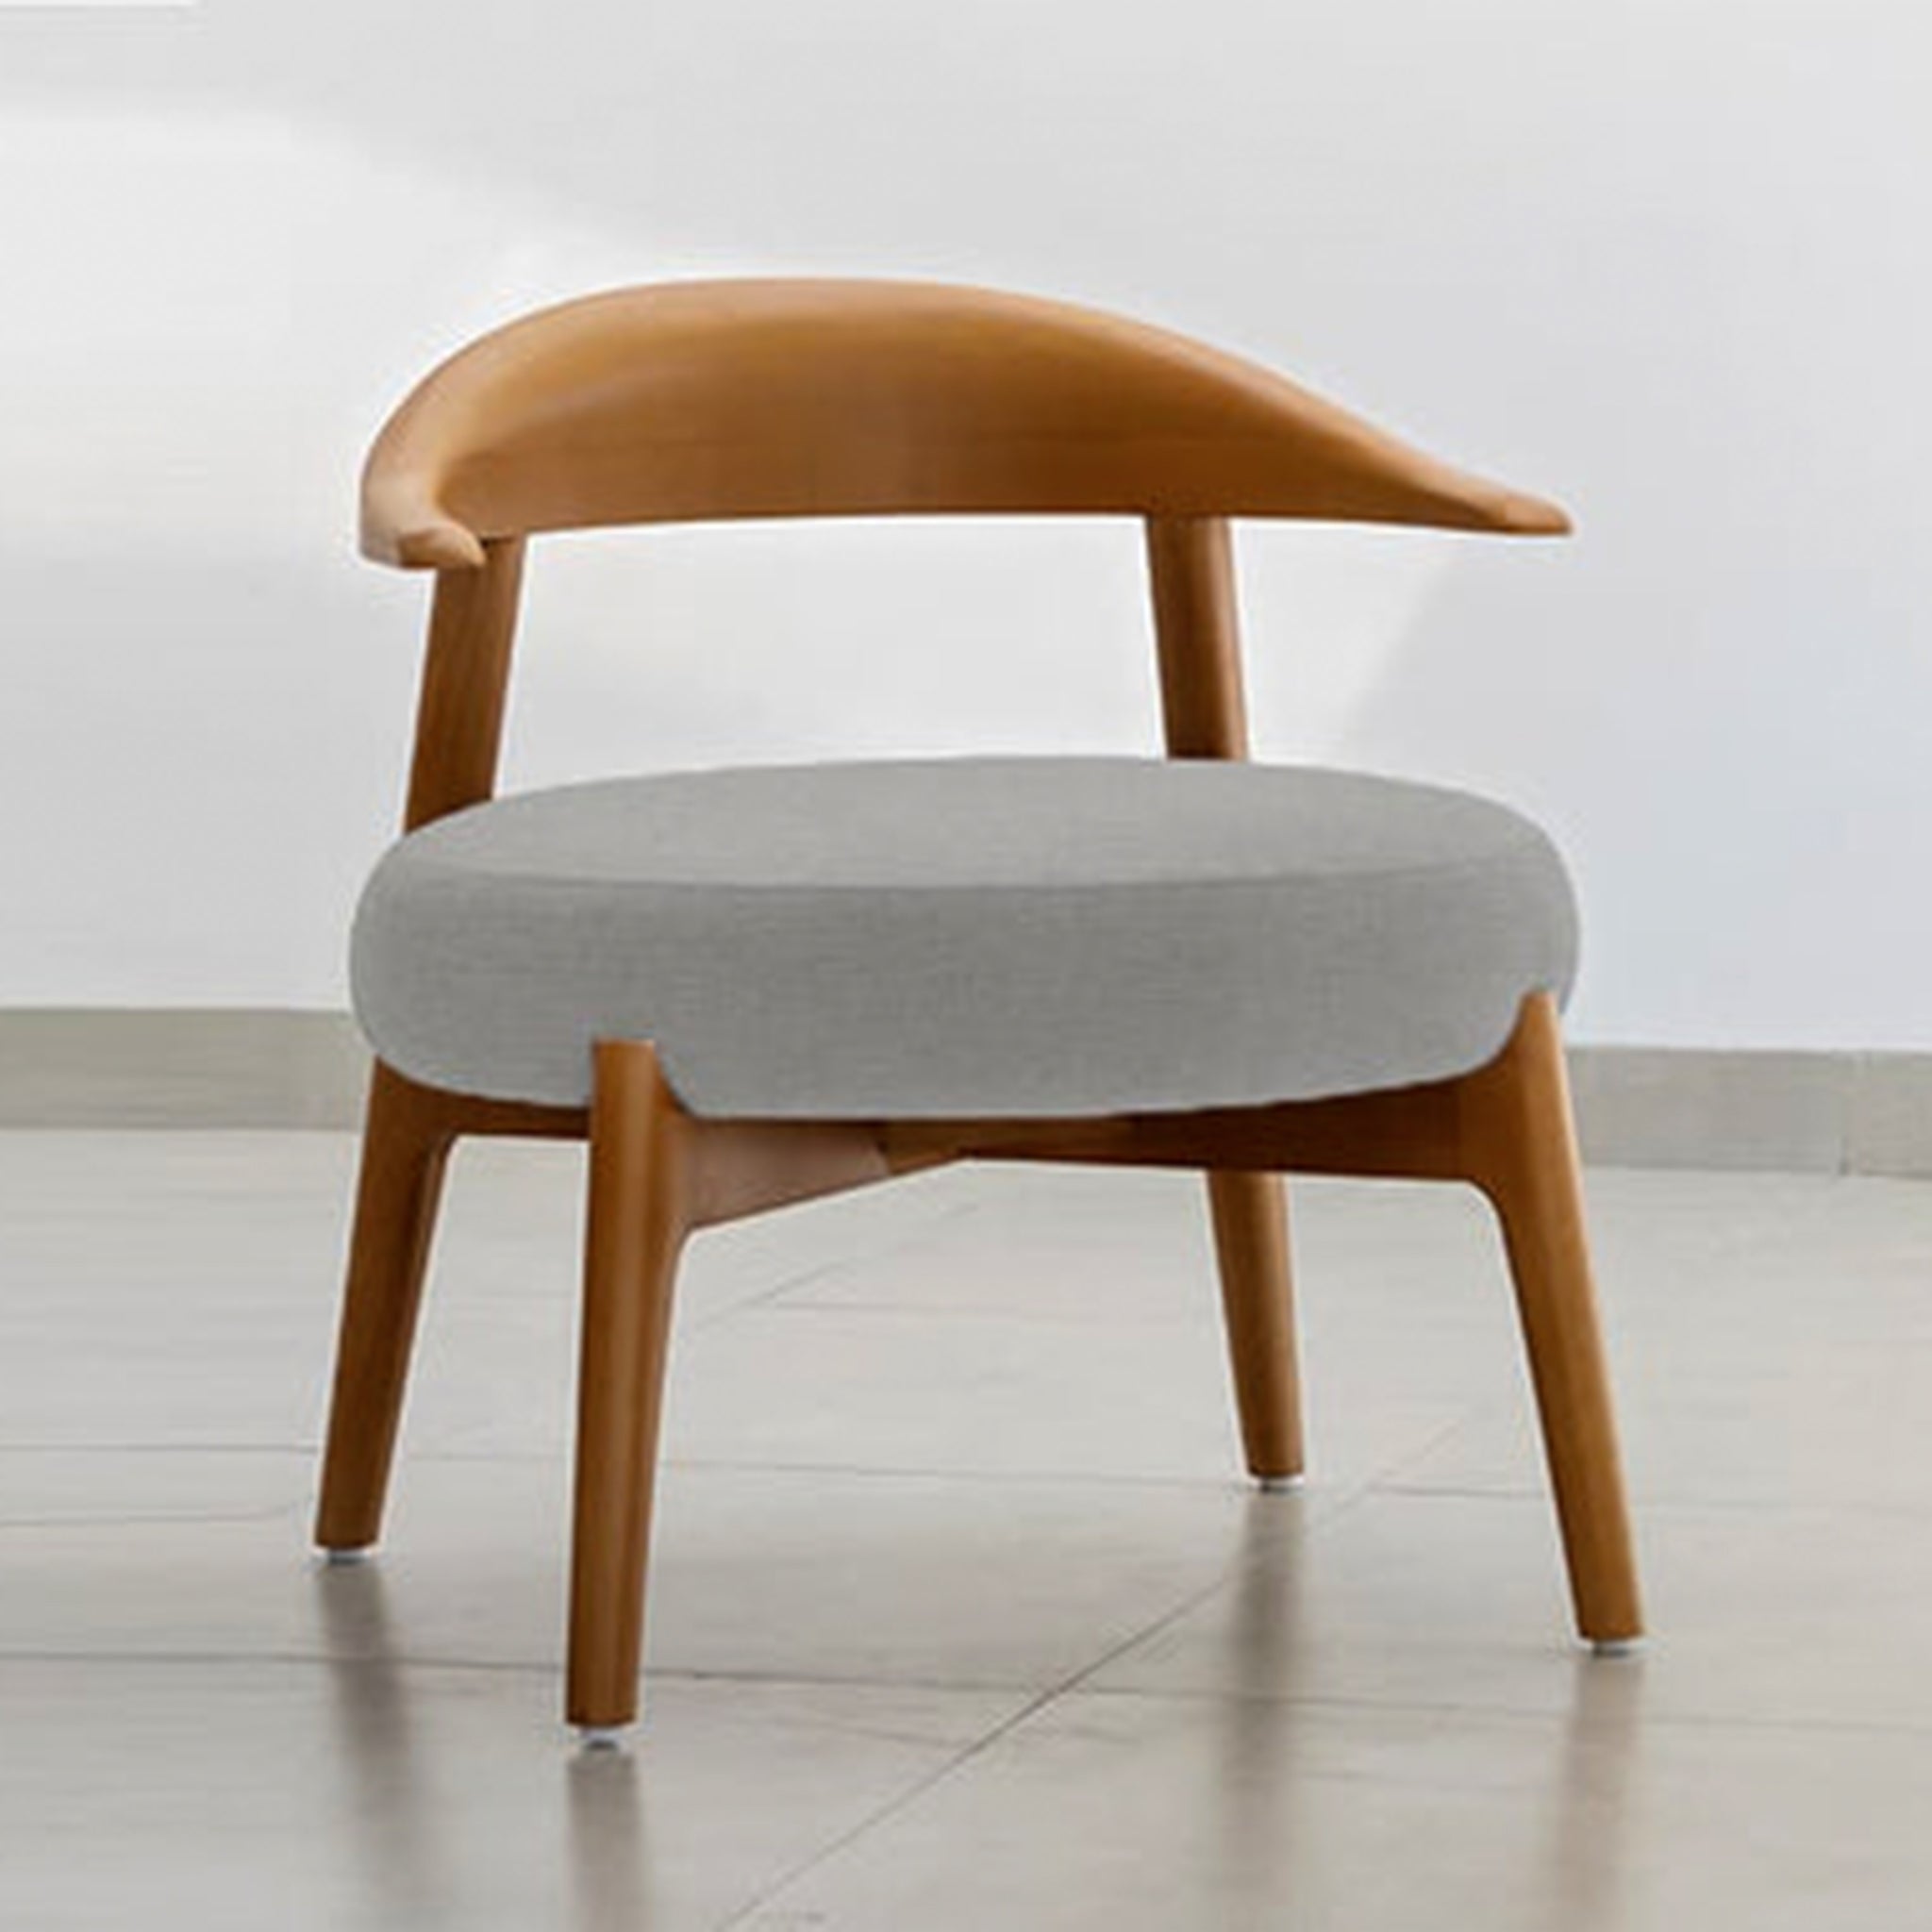 "The Hyde Accent Chair with elegant wooden frame and plush seating"